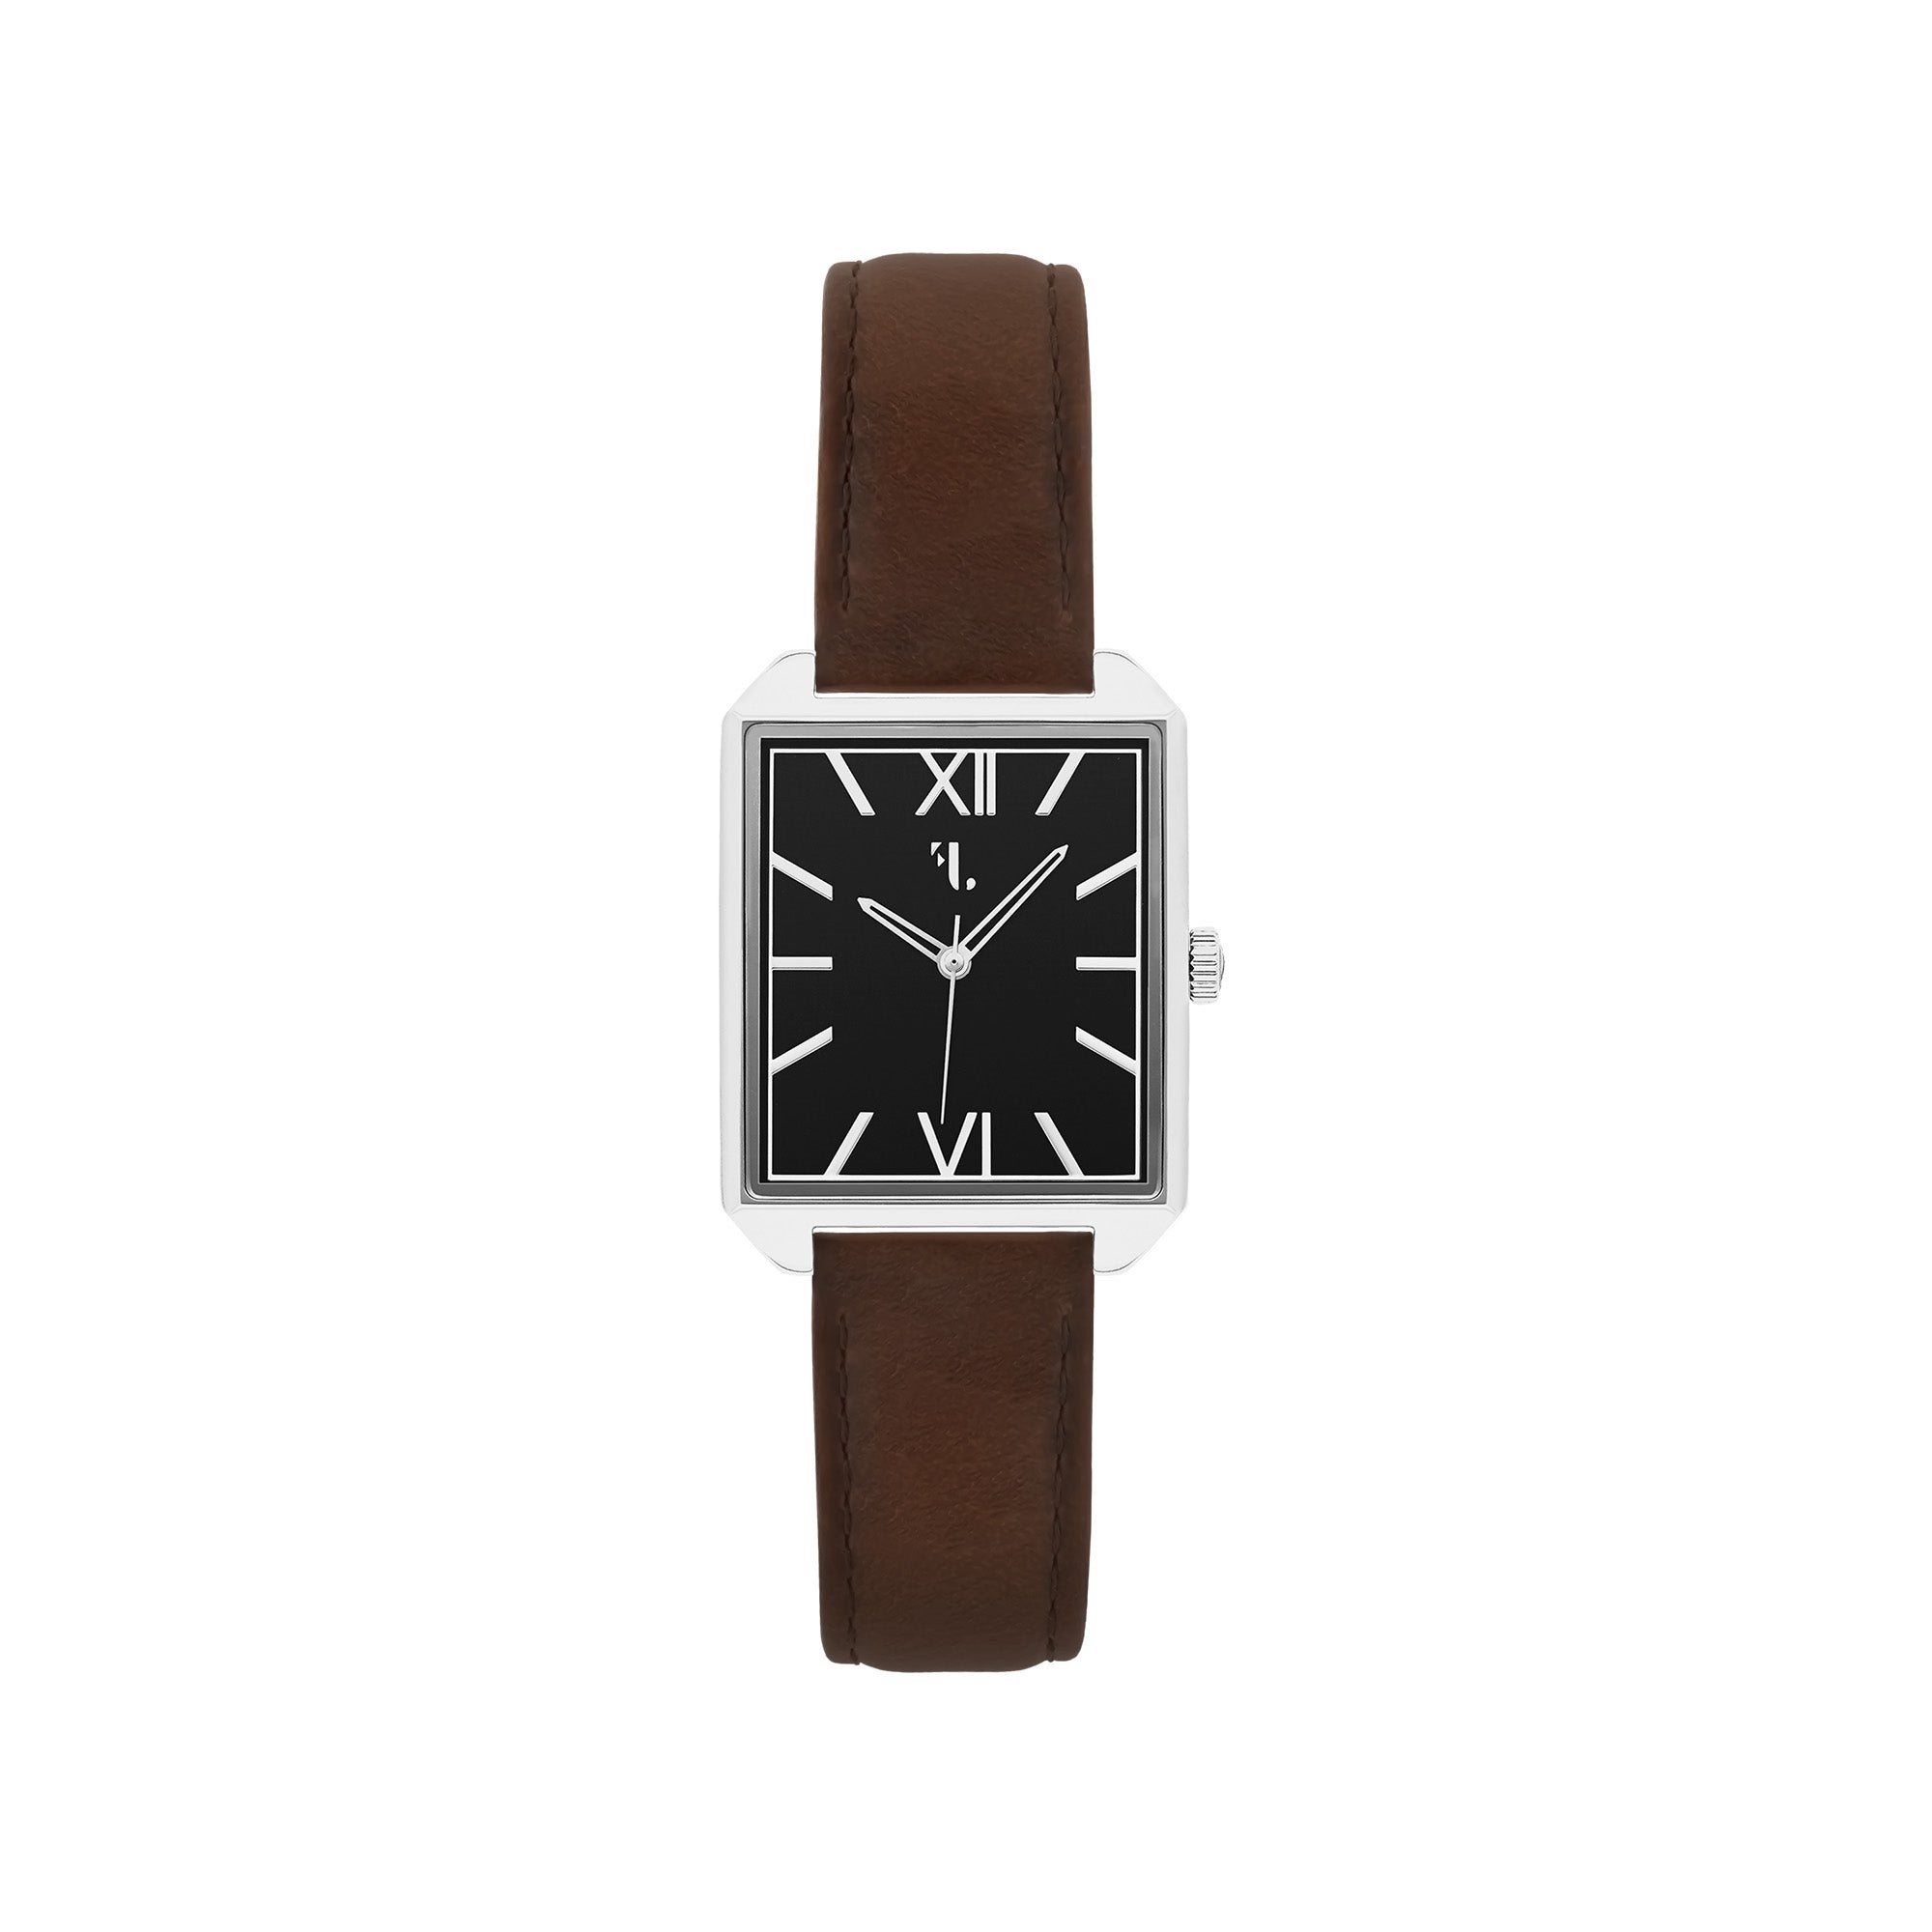 Discover a unique and modern men's watch from Five Jwlry designed in Montreal. This square-shaped watch with a sleek dial is accompanied by a brown leather strap. It is equipped with a silver case and hands with a black dial. It is designed with the greatest care with a quartz mechanism and it has a water resistance of 5ATM.